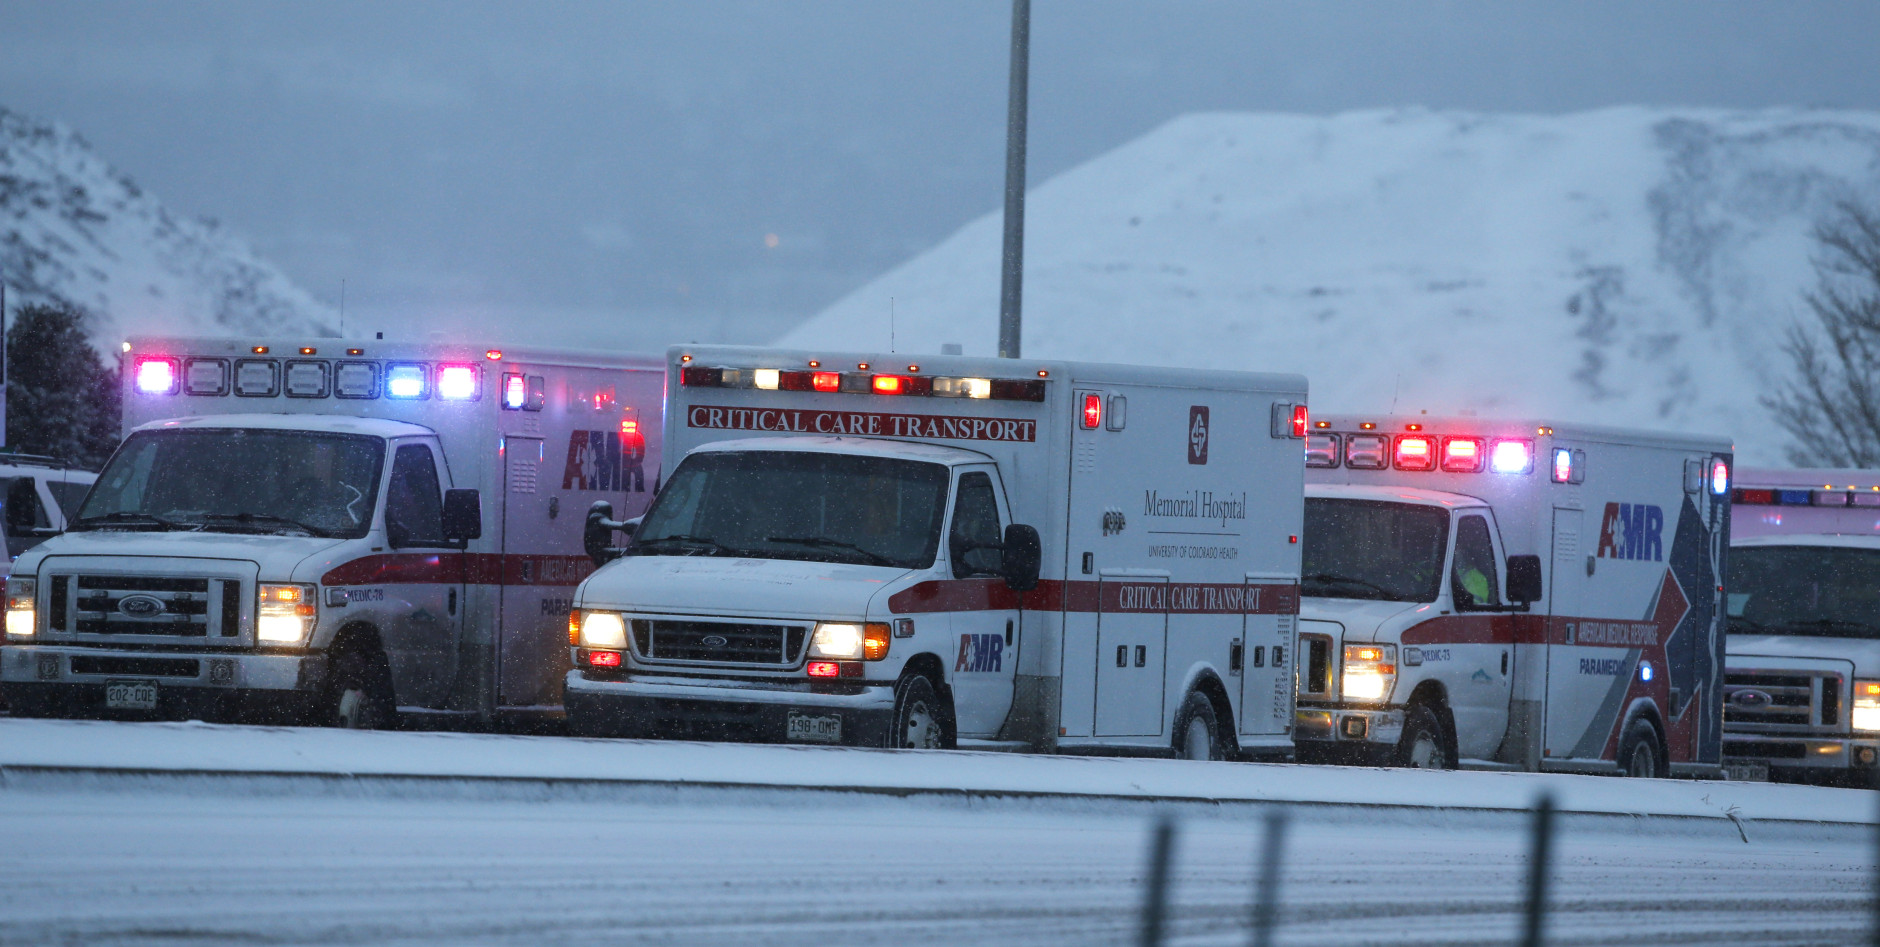 Ambulances wait to be directed near intersection of Centennial and Fillmore near a Planned Parenthood clinic Friday, Nov. 27, 2015, in Colorado Springs, Colo. A gunman opened fire at the clinic on Friday, authorities said, wounding multiple people. (AP Photo/David Zalubowski)